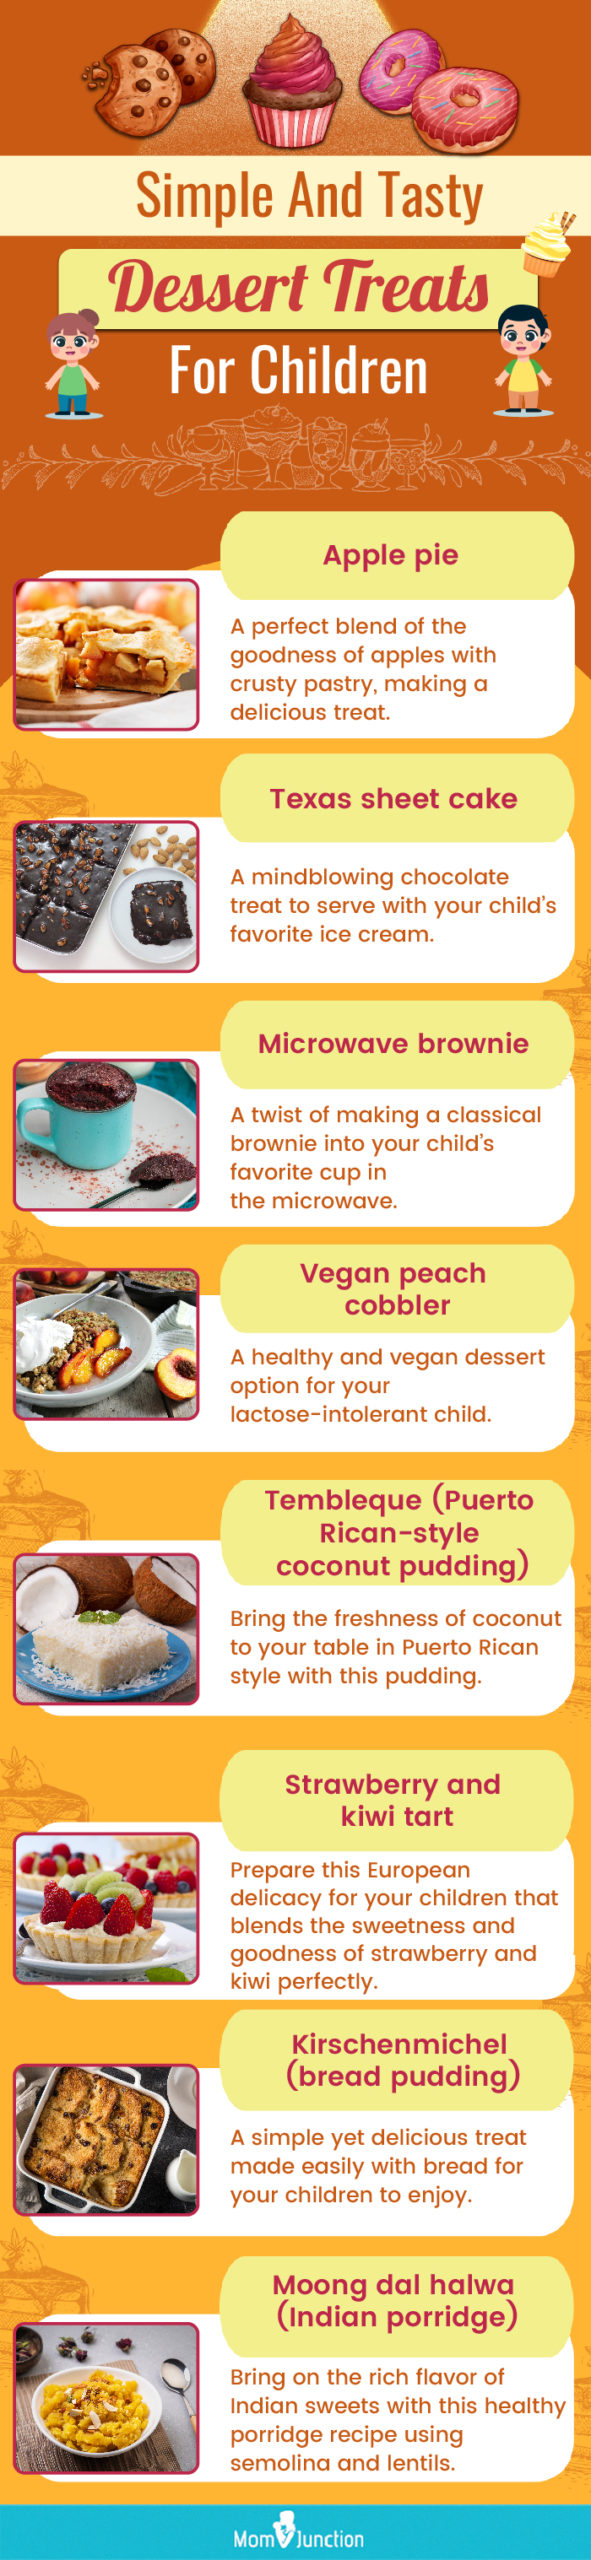 simple and tasty dessert treats for children (infographic)